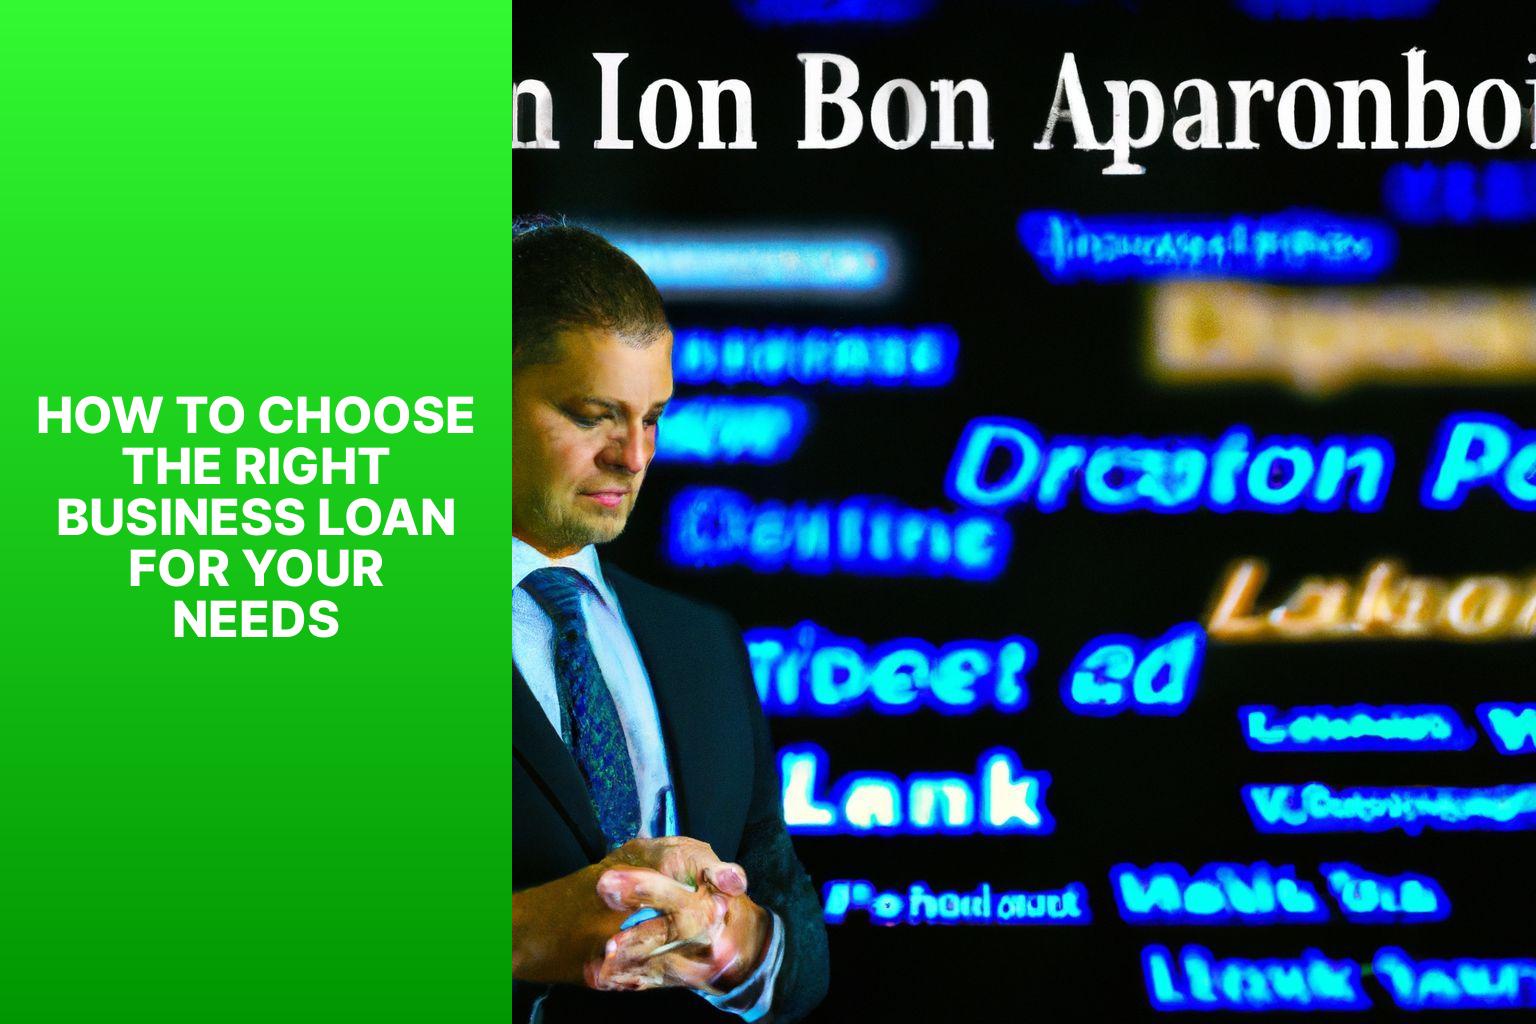 How to Choose the Right Business Loan for Your Needs - Choosing Wisely: Comparing Different Business Loans 